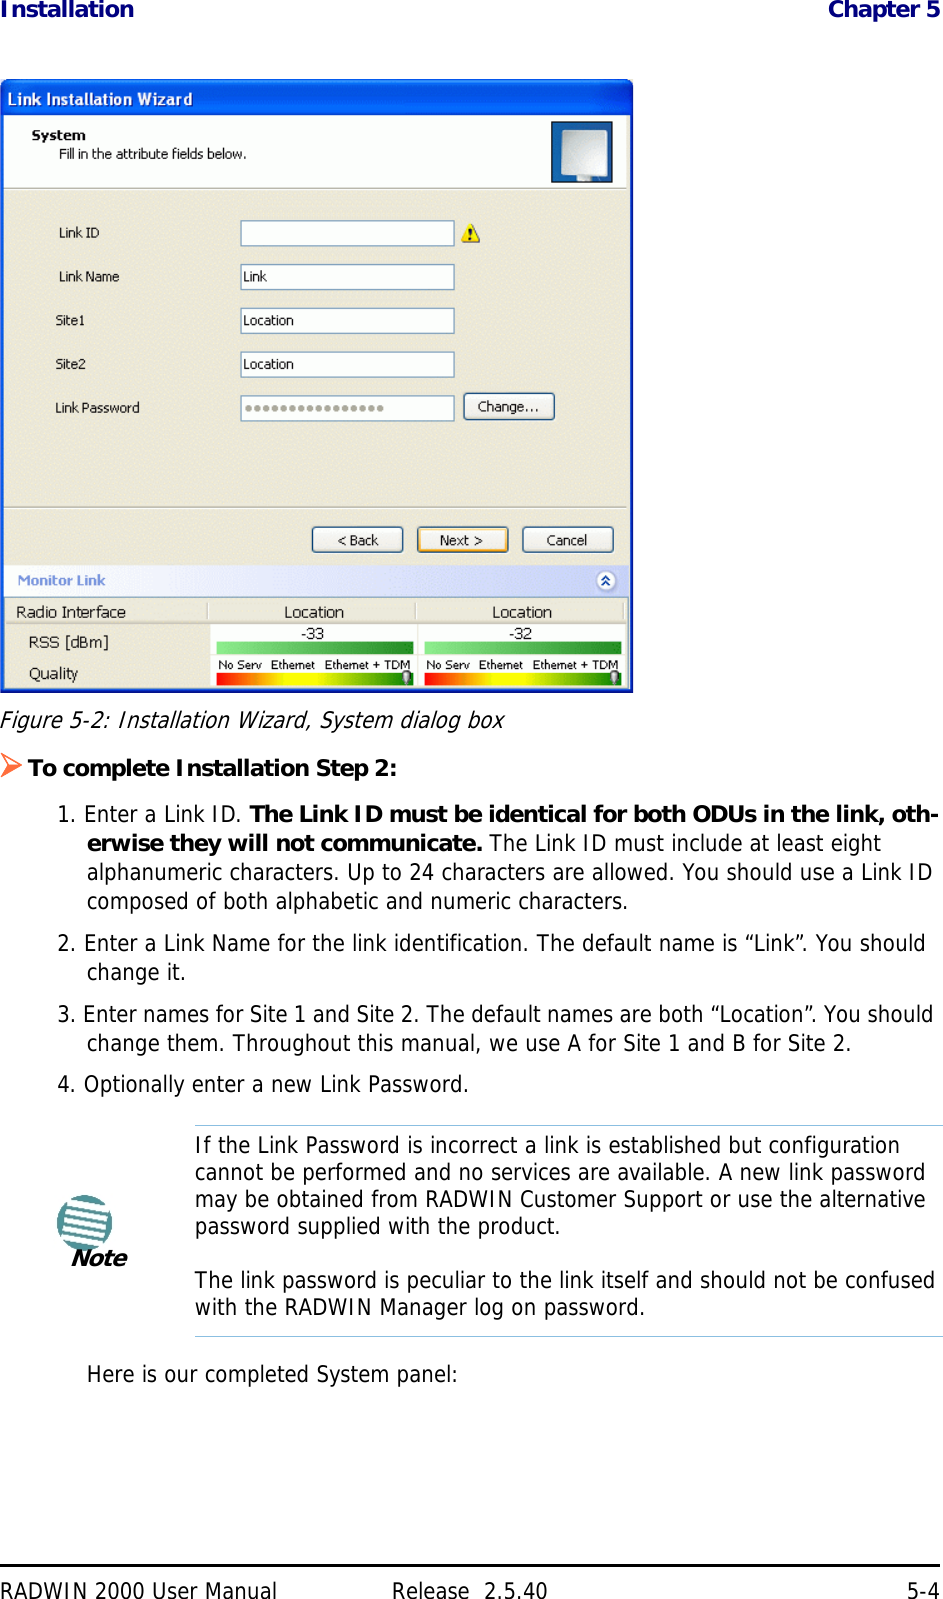 Installation Chapter 5RADWIN 2000 User Manual Release  2.5.40 5-4Figure 5-2: Installation Wizard, System dialog boxTo complete Installation Step 2:1. Enter a Link ID. The Link ID must be identical for both ODUs in the link, oth-erwise they will not communicate. The Link ID must include at least eight alphanumeric characters. Up to 24 characters are allowed. You should use a Link ID composed of both alphabetic and numeric characters.2. Enter a Link Name for the link identification. The default name is “Link”. You should change it.3. Enter names for Site 1 and Site 2. The default names are both “Location”. You should change them. Throughout this manual, we use A for Site 1 and B for Site 2.4. Optionally enter a new Link Password. Here is our completed System panel:NoteIf the Link Password is incorrect a link is established but configuration cannot be performed and no services are available. A new link password may be obtained from RADWIN Customer Support or use the alternative password supplied with the product. The link password is peculiar to the link itself and should not be confused with the RADWIN Manager log on password.